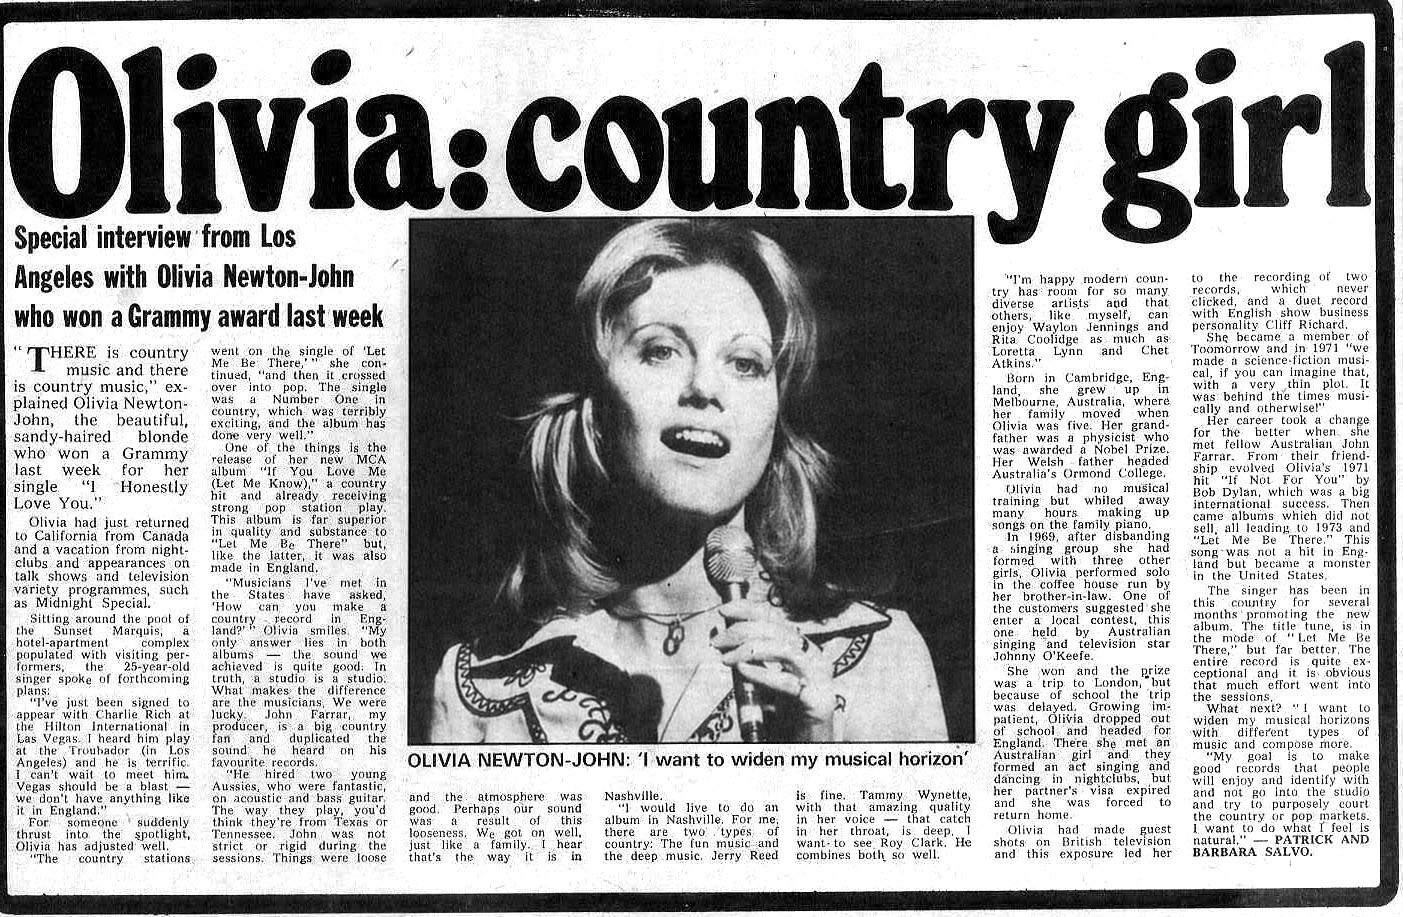 Olivia - Country Girl